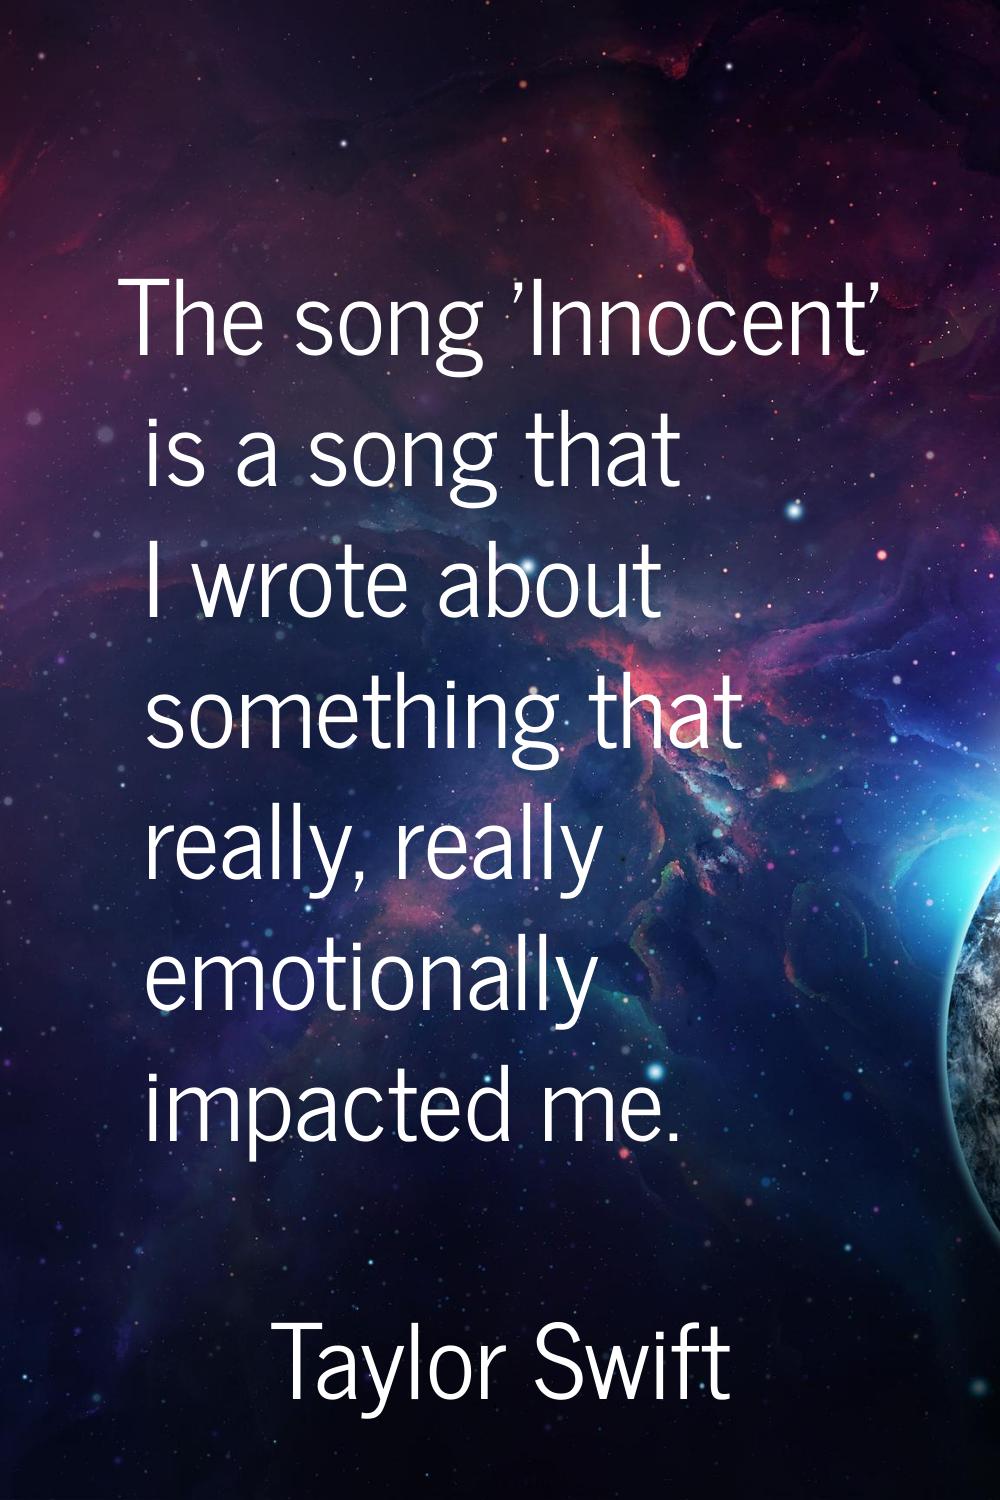 The song 'Innocent' is a song that I wrote about something that really, really emotionally impacted